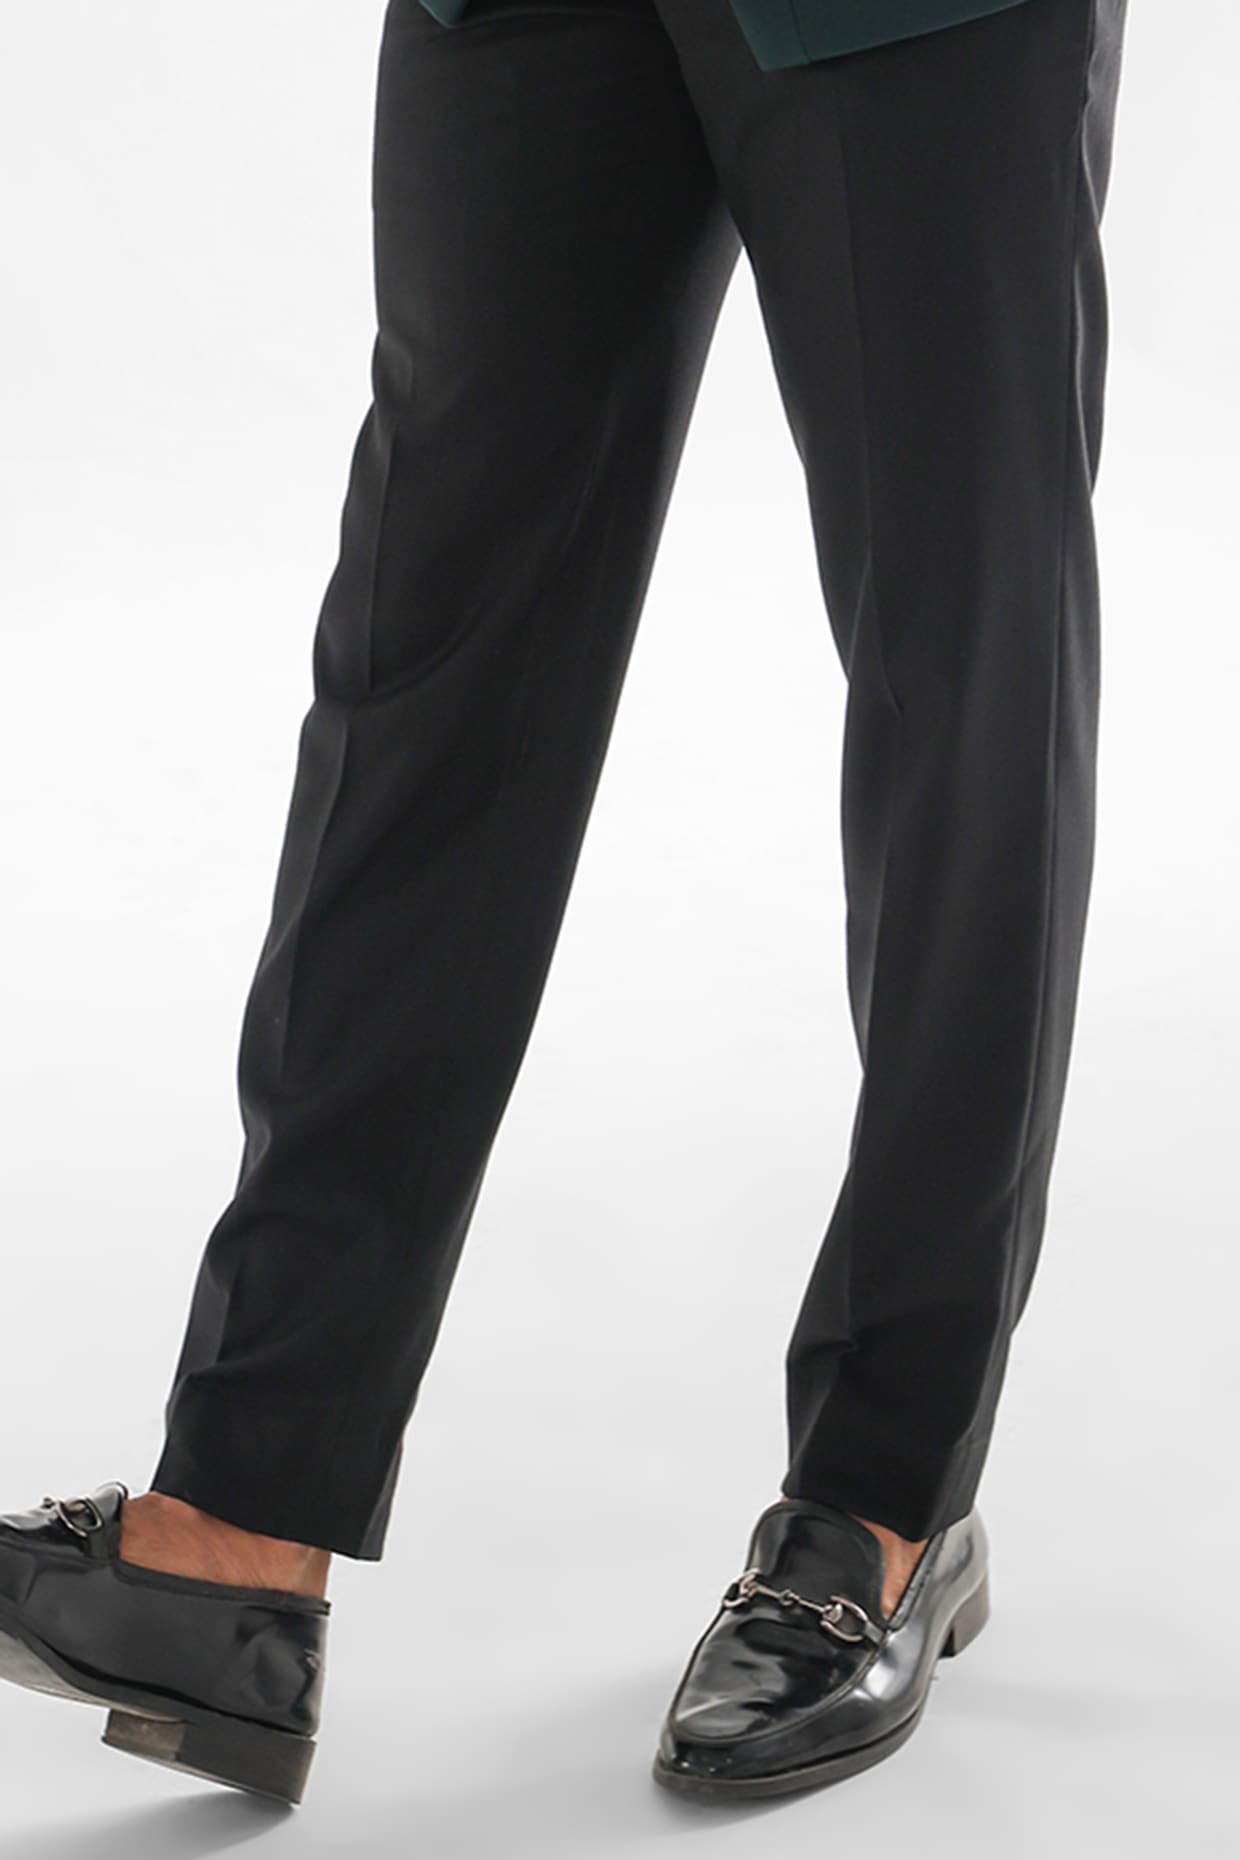 Buy Black Terrycot Paneled Suit Set For Men by Paarsh Online at Aza  Fashions.